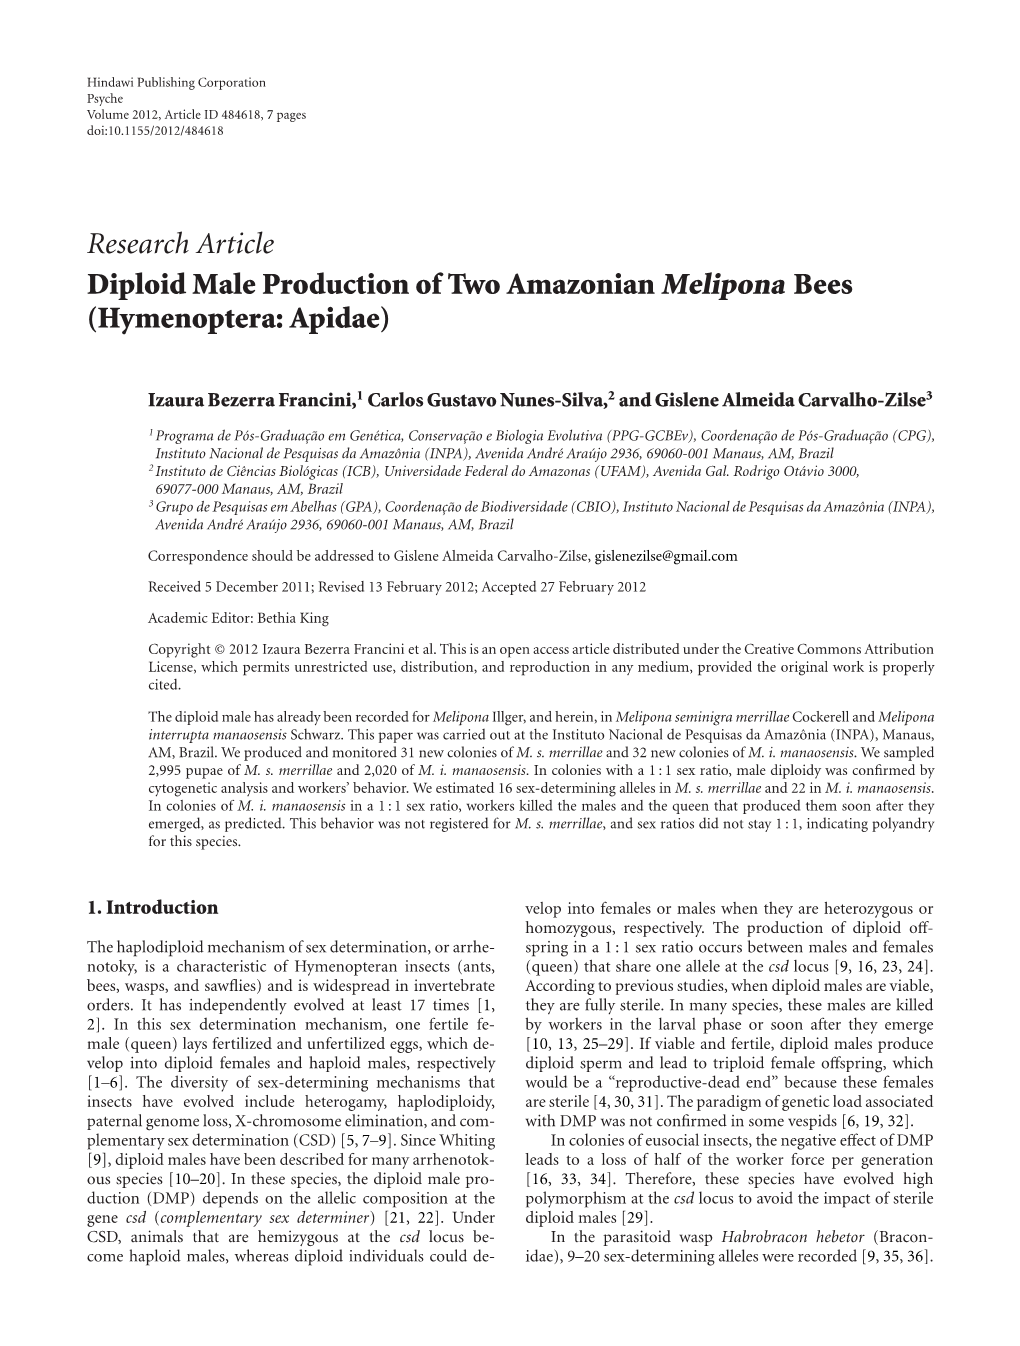 Diploid Male Production of Two Amazonian Melipona Bees (Hymenoptera: Apidae)